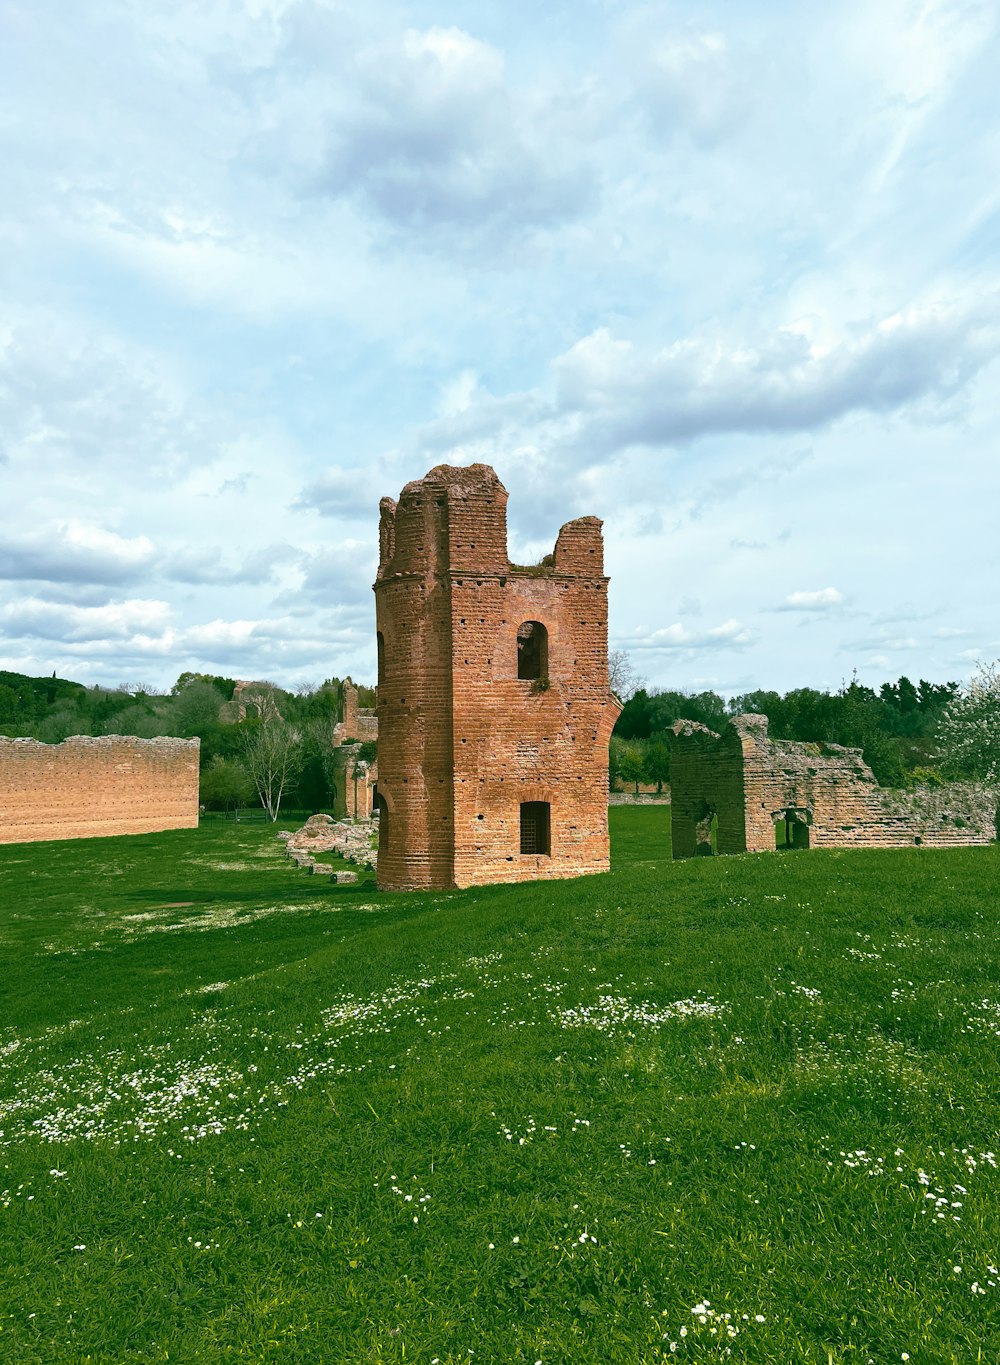 a large brick building sitting on top of a lush green field